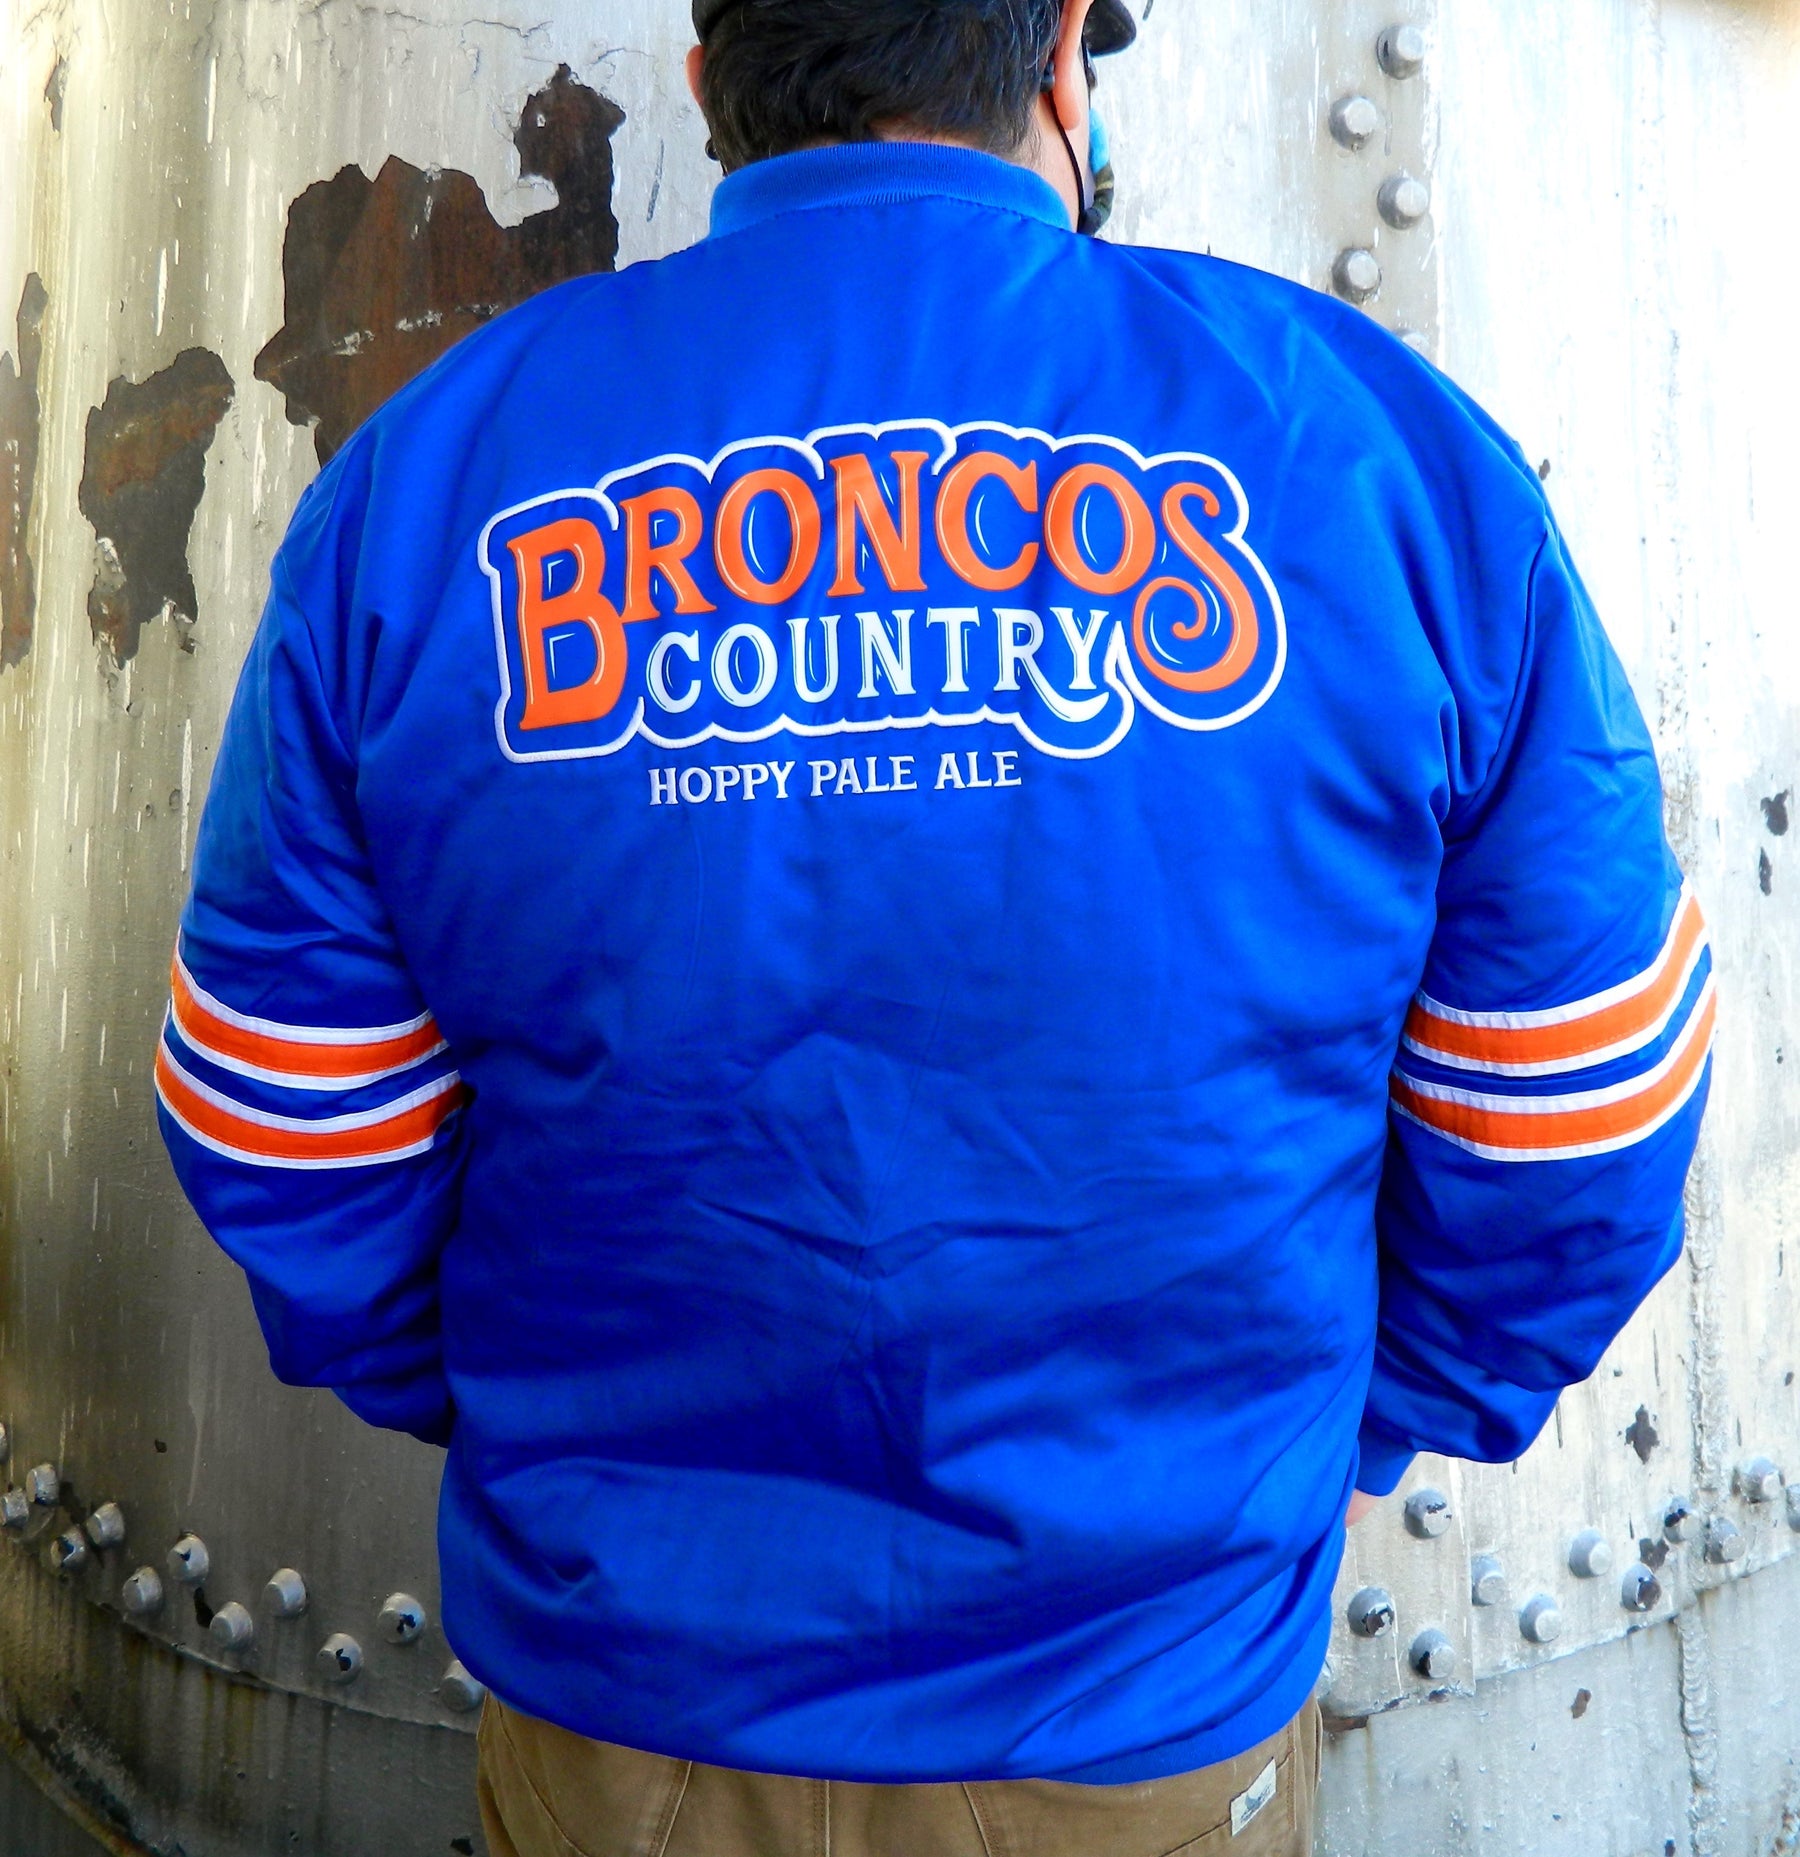 Broncos Country Jacket